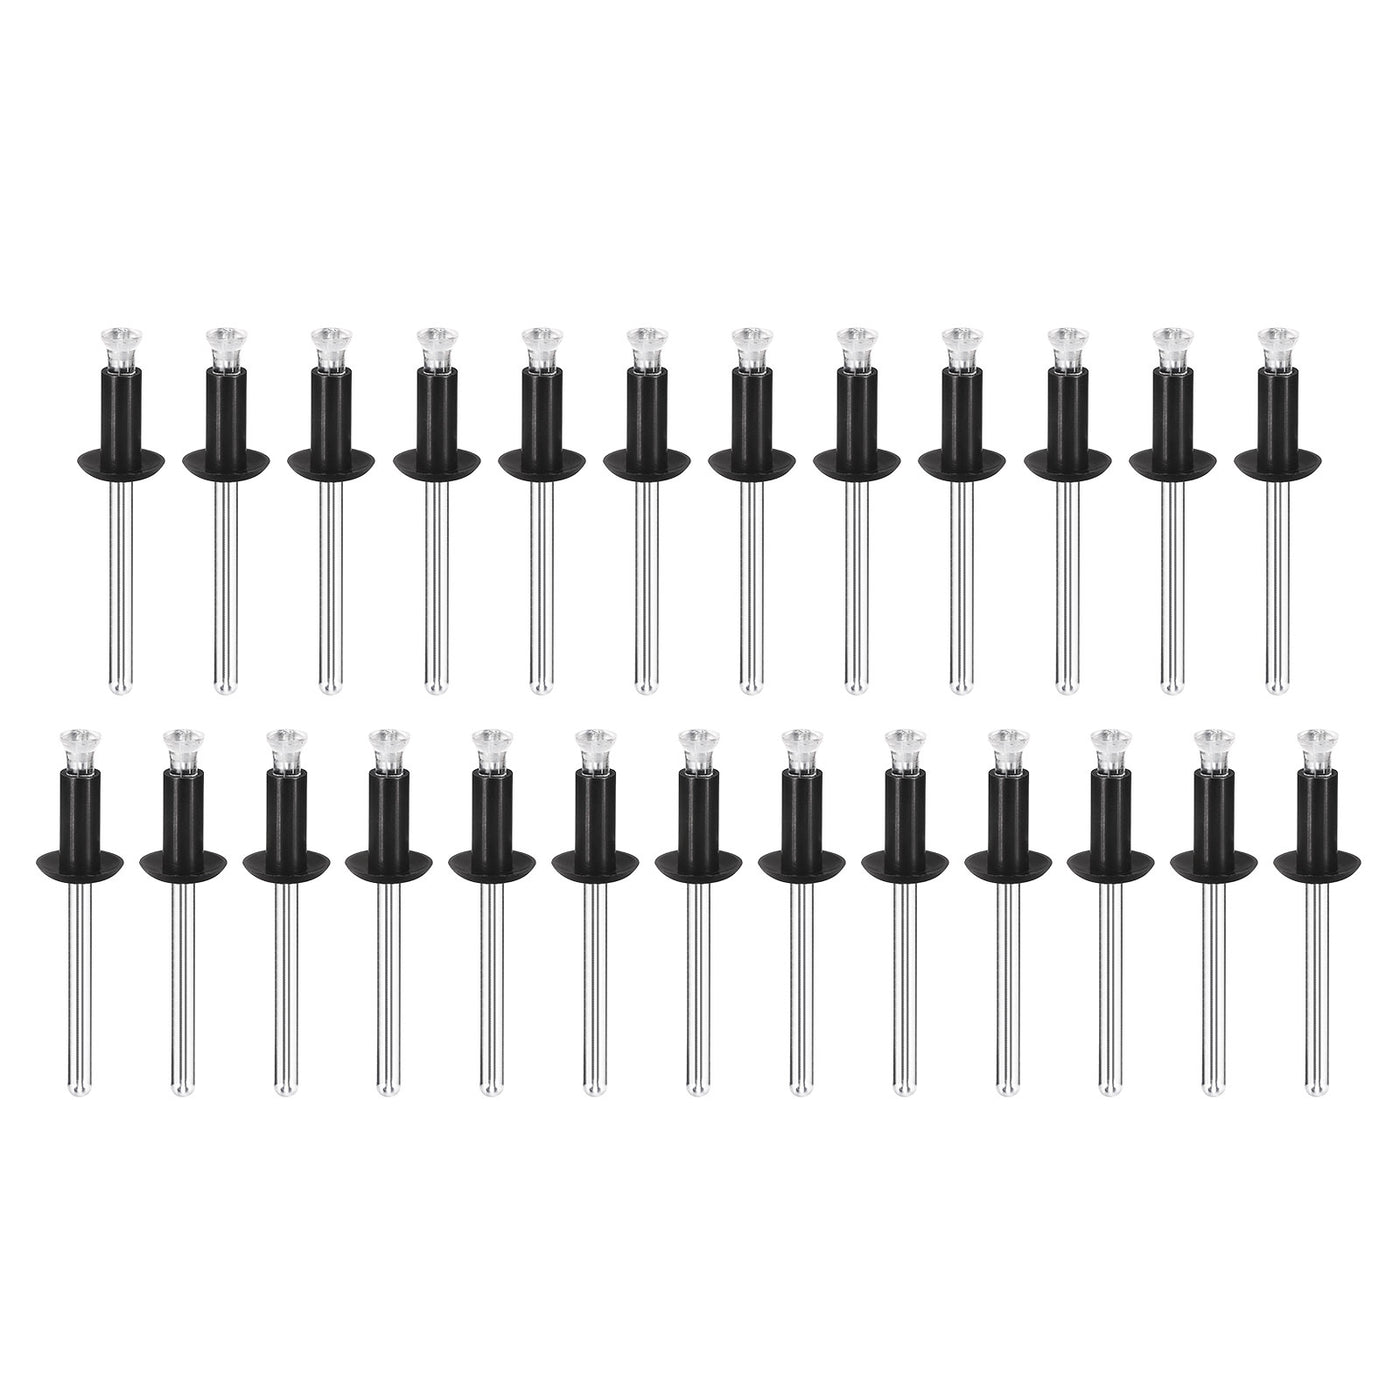 uxcell Uxcell 5.6mm x 12.7mm Nylon Blind Rivets for PC Board Bumper Trim Retainer, Black 25Pcs